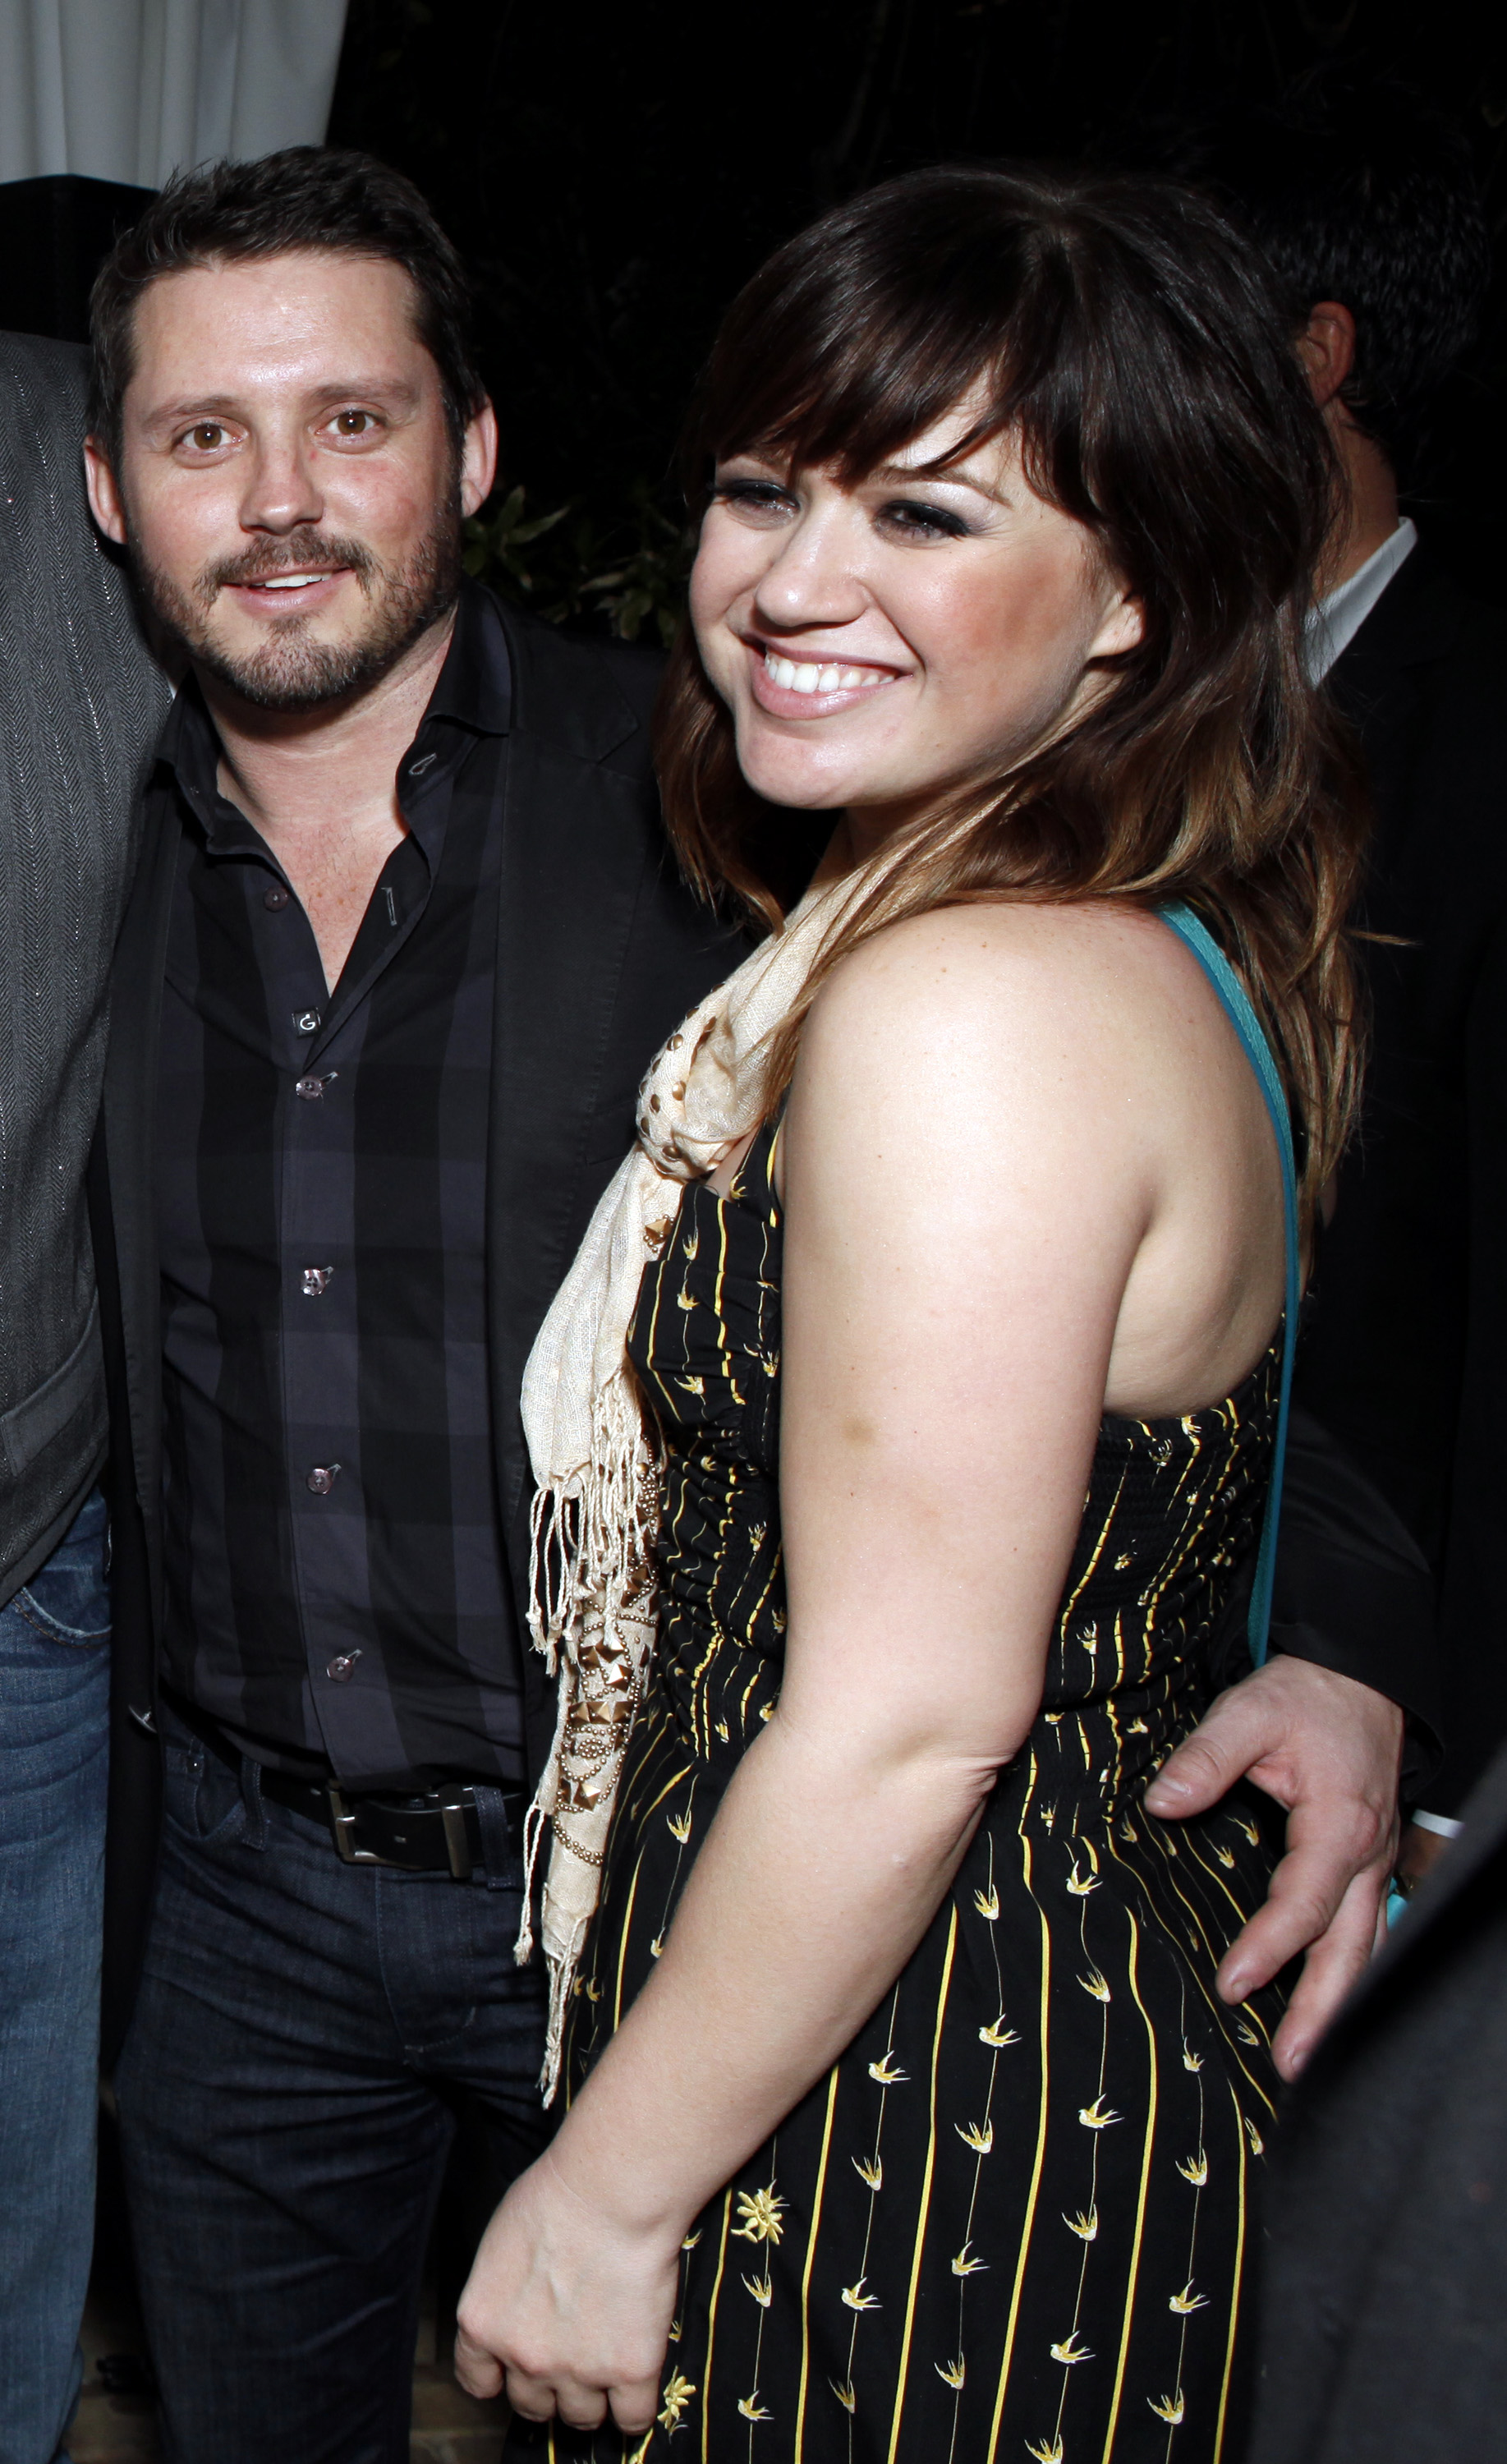 Brandon Blackstock and Kelly Clarkson attend the Warner Music Group Grammy Celebration at Chateau Marmont on February 12, 2012 in Los Angeles, California | Source: Getty Images